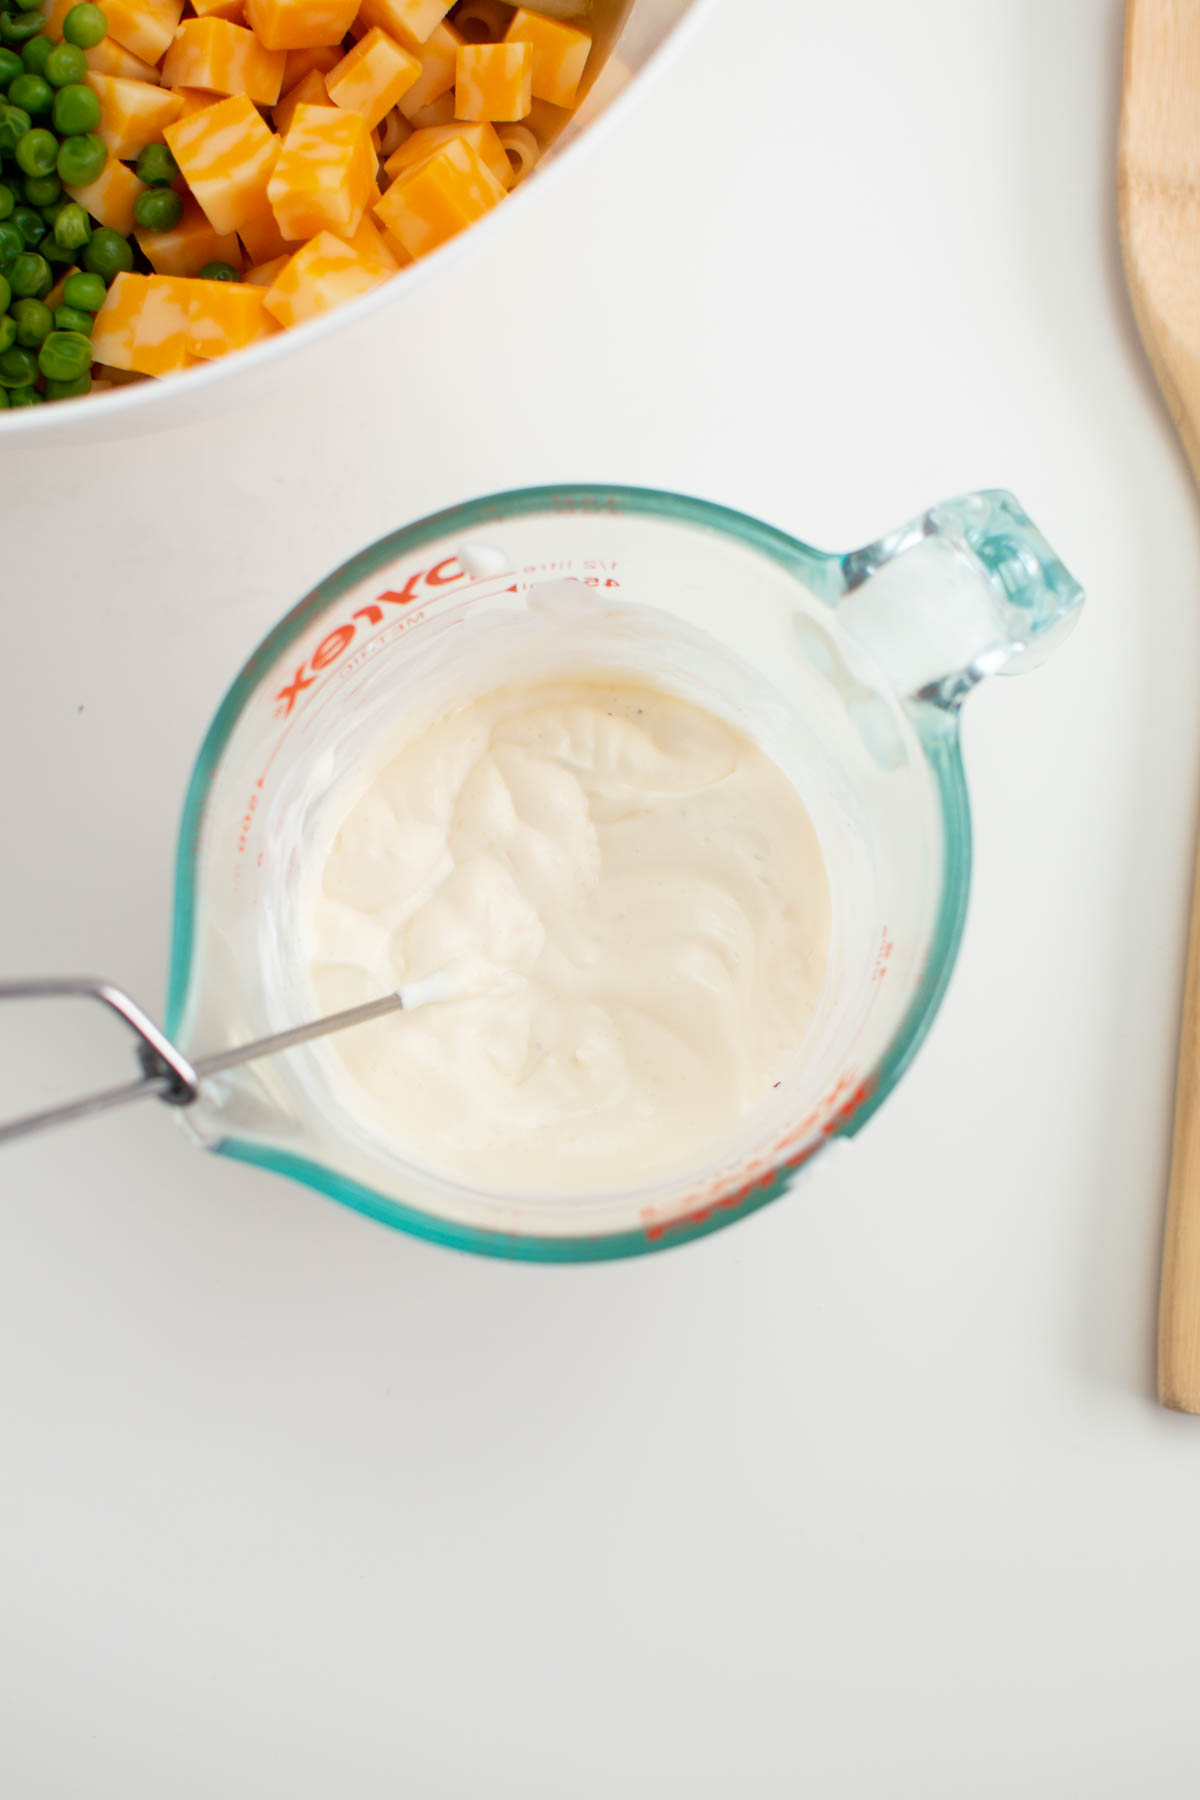 Mayonnaise and sour cream mixture in glass measuring cup with whisk.